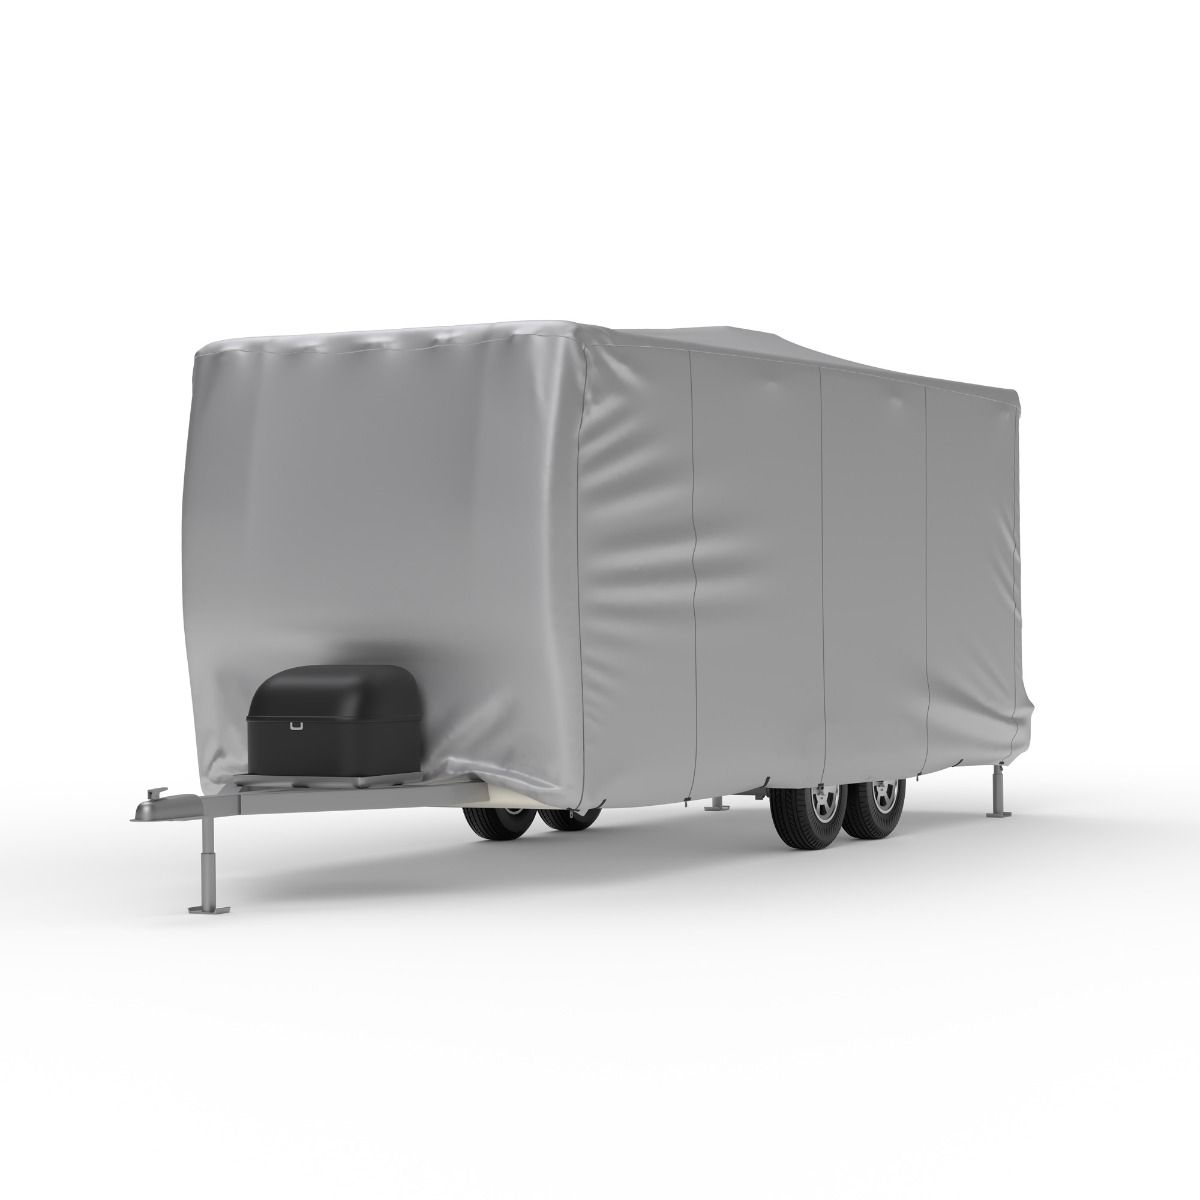 Platinum Shield Travel Trailer RV Cover (Fits Up To 9.5' Long)